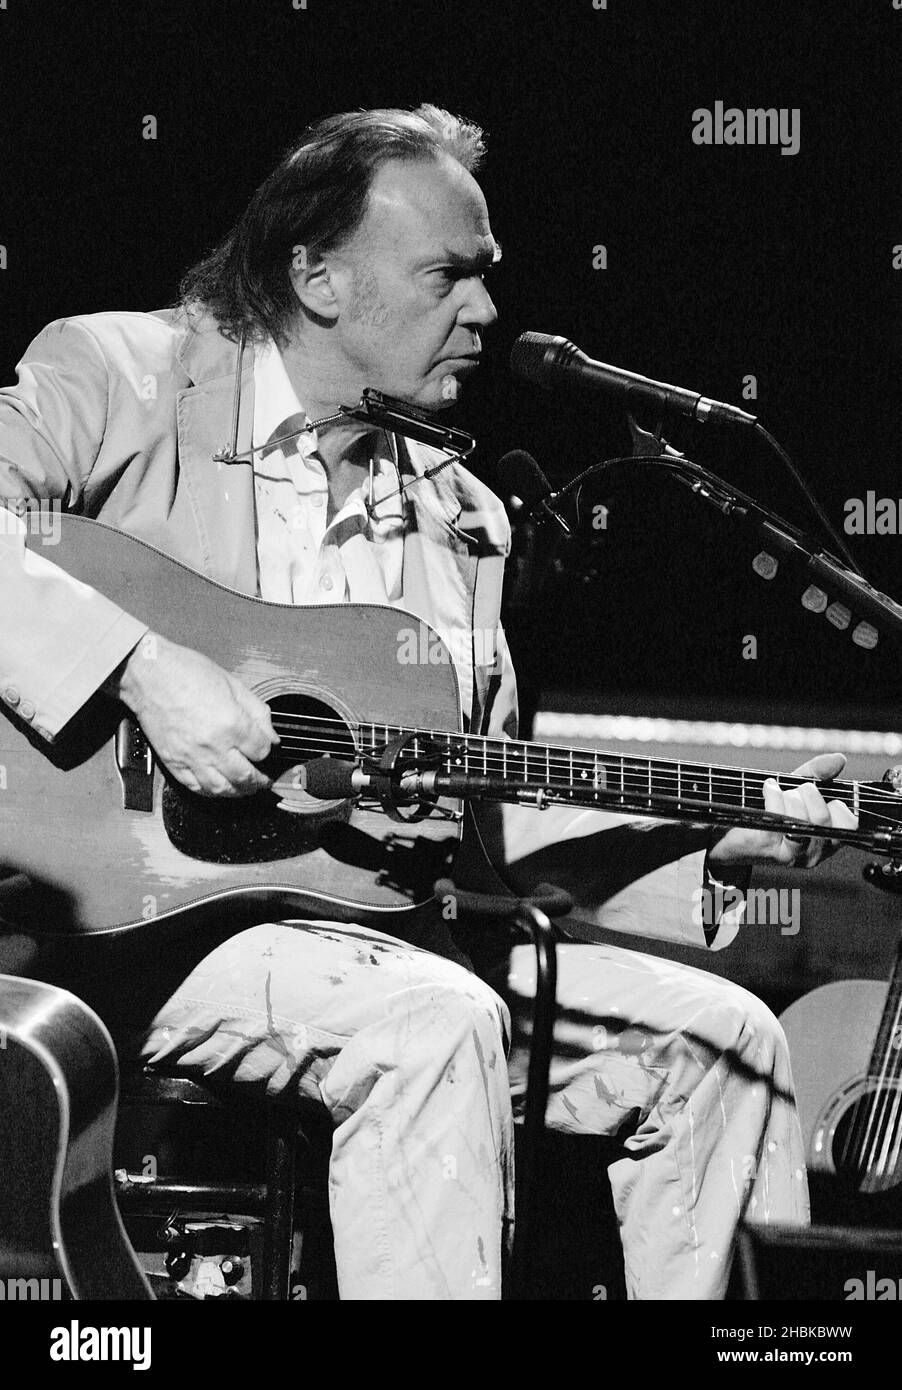 Neil Young performing the acoustic half of his concert at the Hammersmith Apollo in west London. Stock Photo